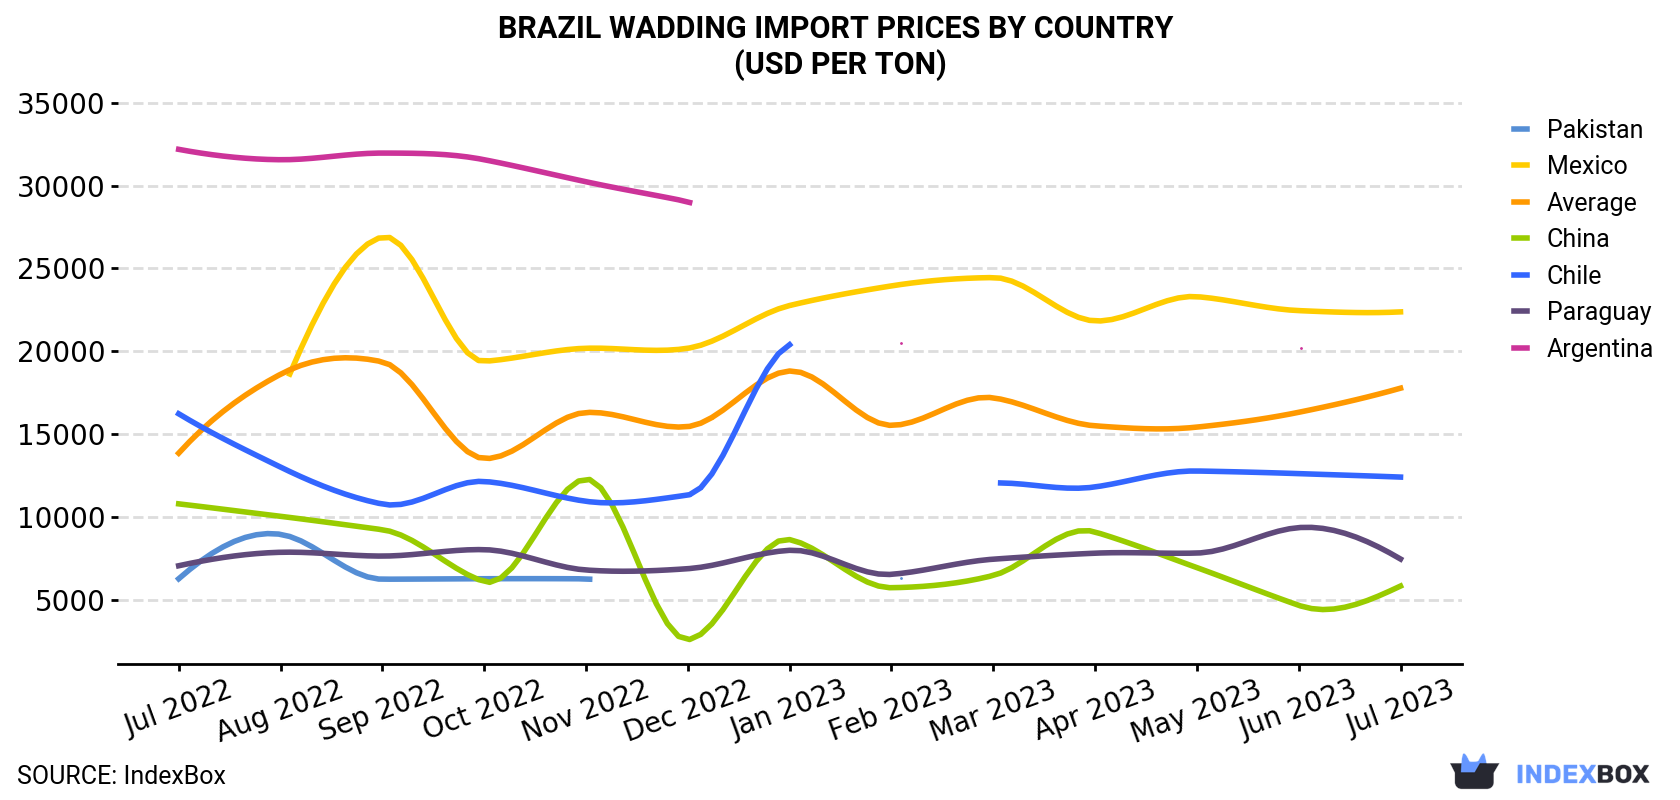 Brazil Wadding Import Prices By Country (USD Per Ton)